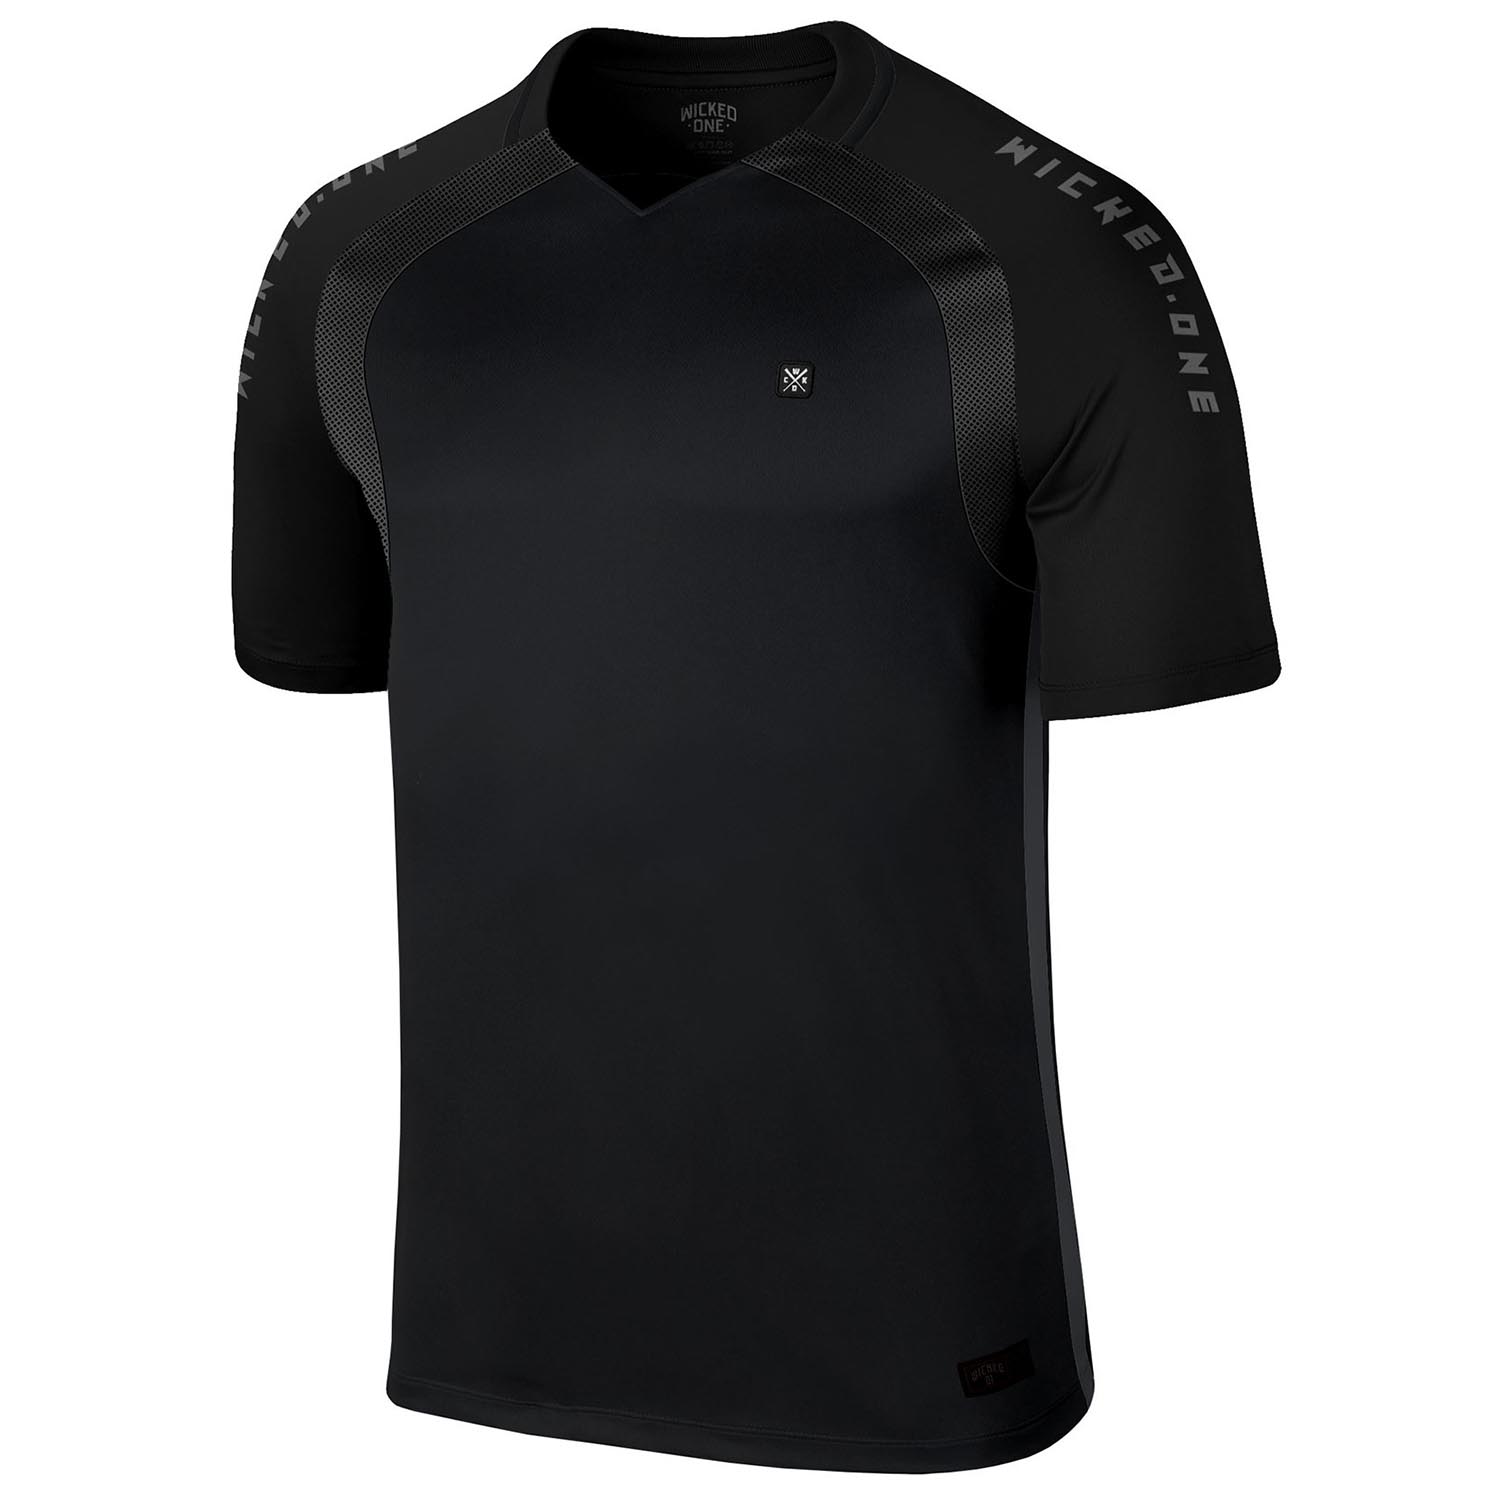 Wicked One Performance T-Shirt, Prime, black